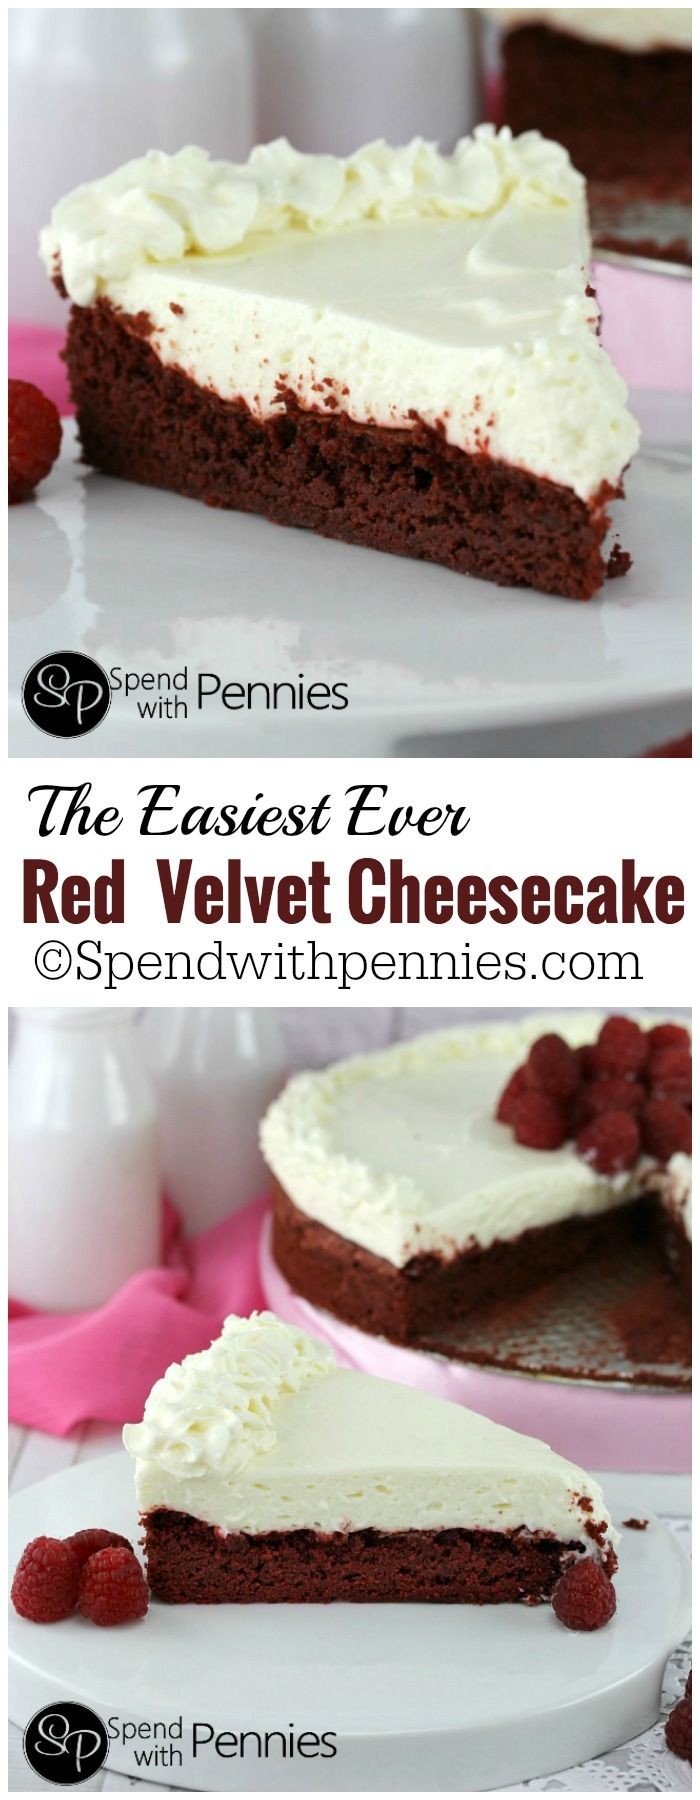 This is one of the easiest Red Velvet Cheesecake r...